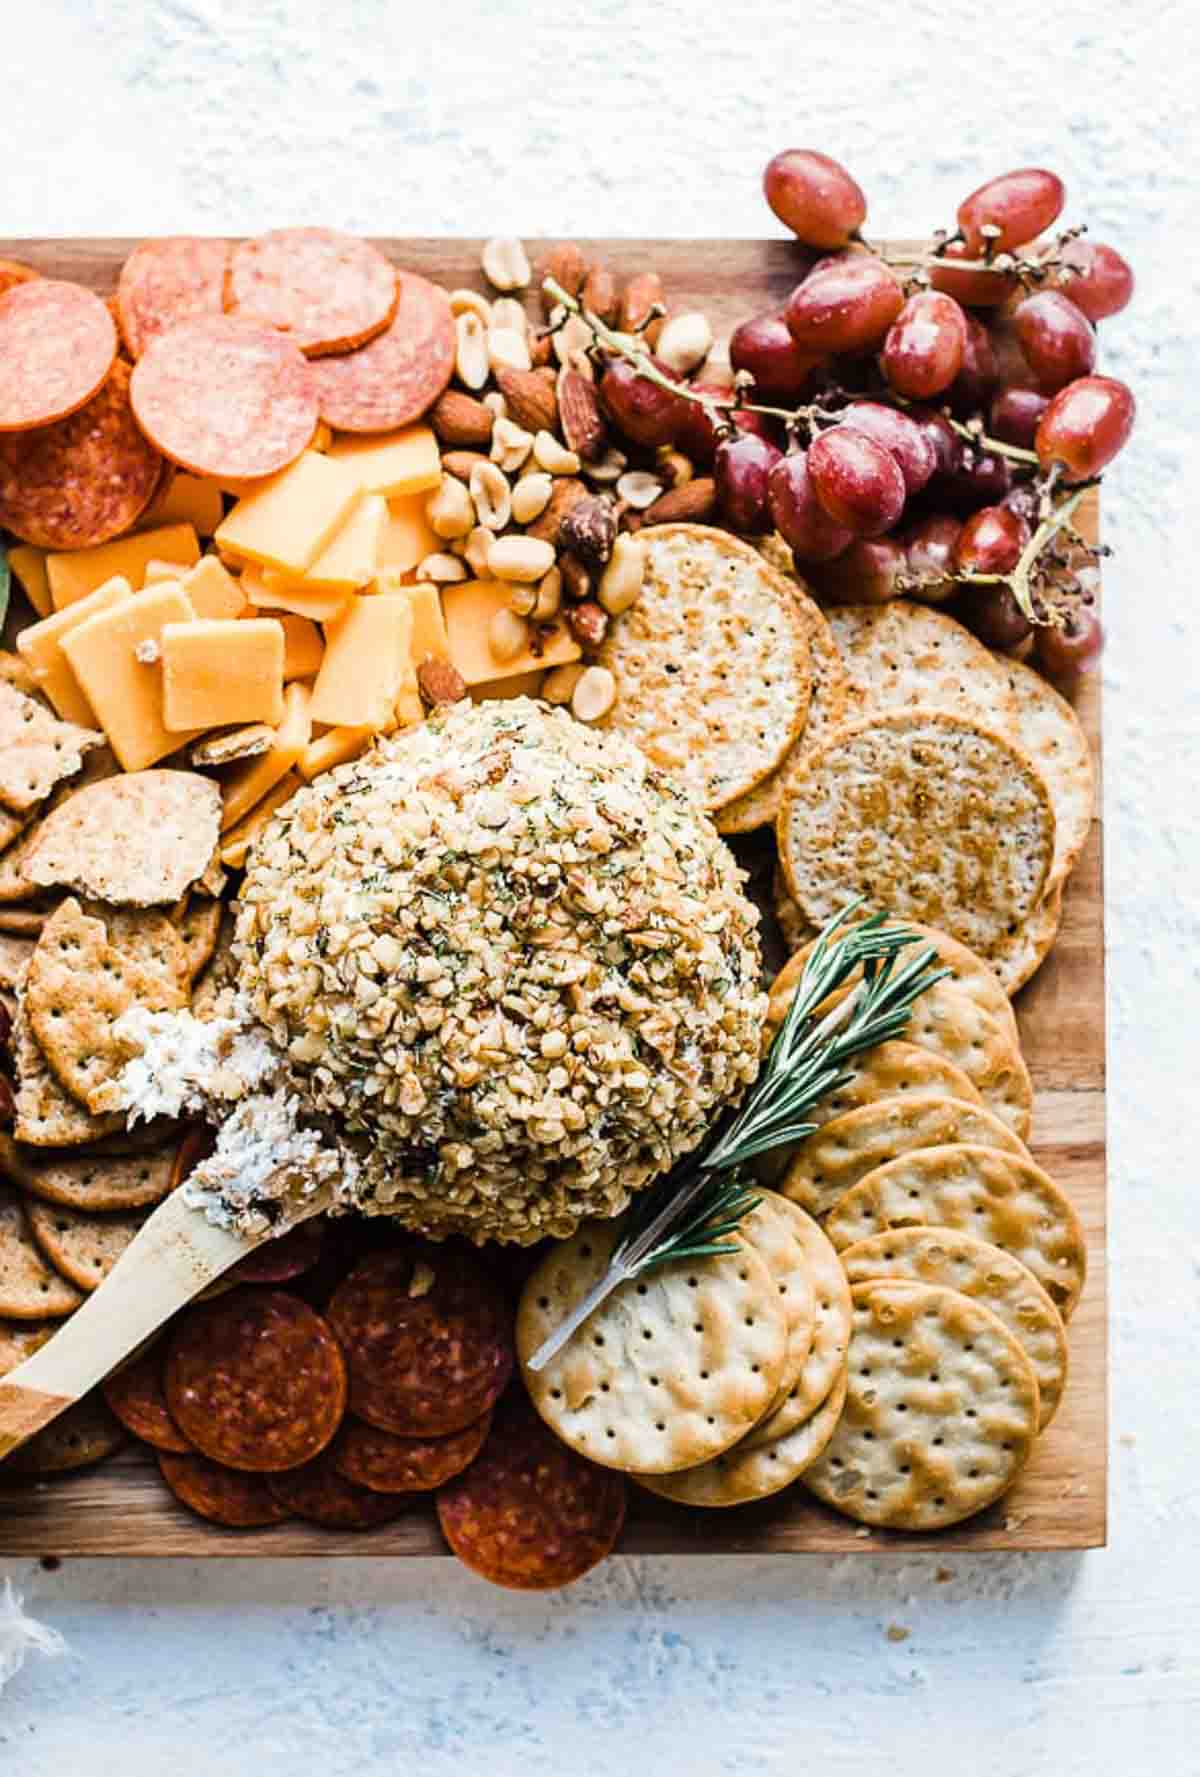 Ranch cheeseball recipe on a wooden cutting board with crackers, nuts, olives, grapes, and meats.